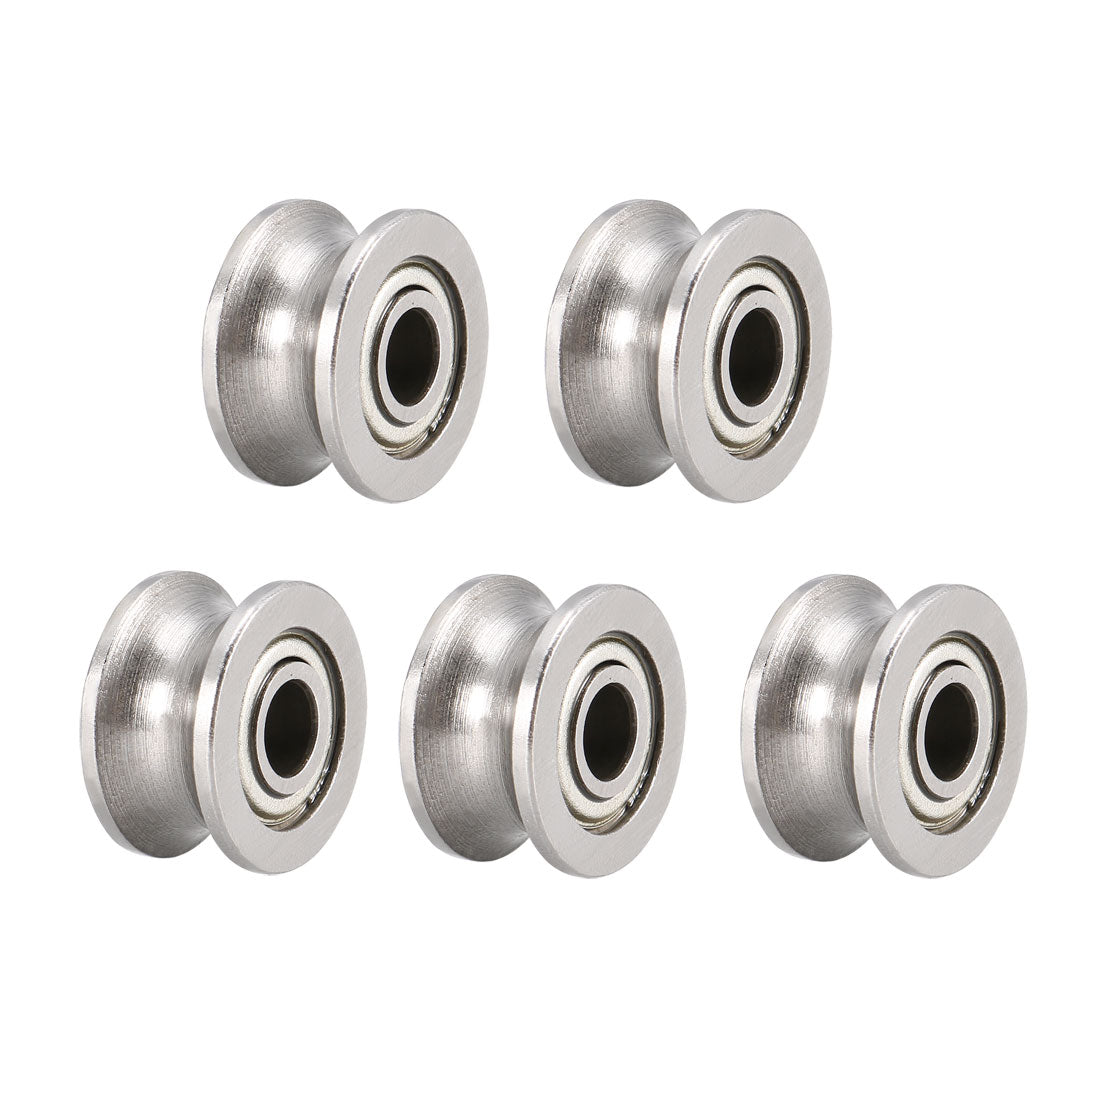 uxcell Uxcell U624ZZ Deep Groove Guide Pulley Rail Ball Bearings 4mmx13mmx7mm Double Metal Shielded Carbon Steel Bearings 5pcs